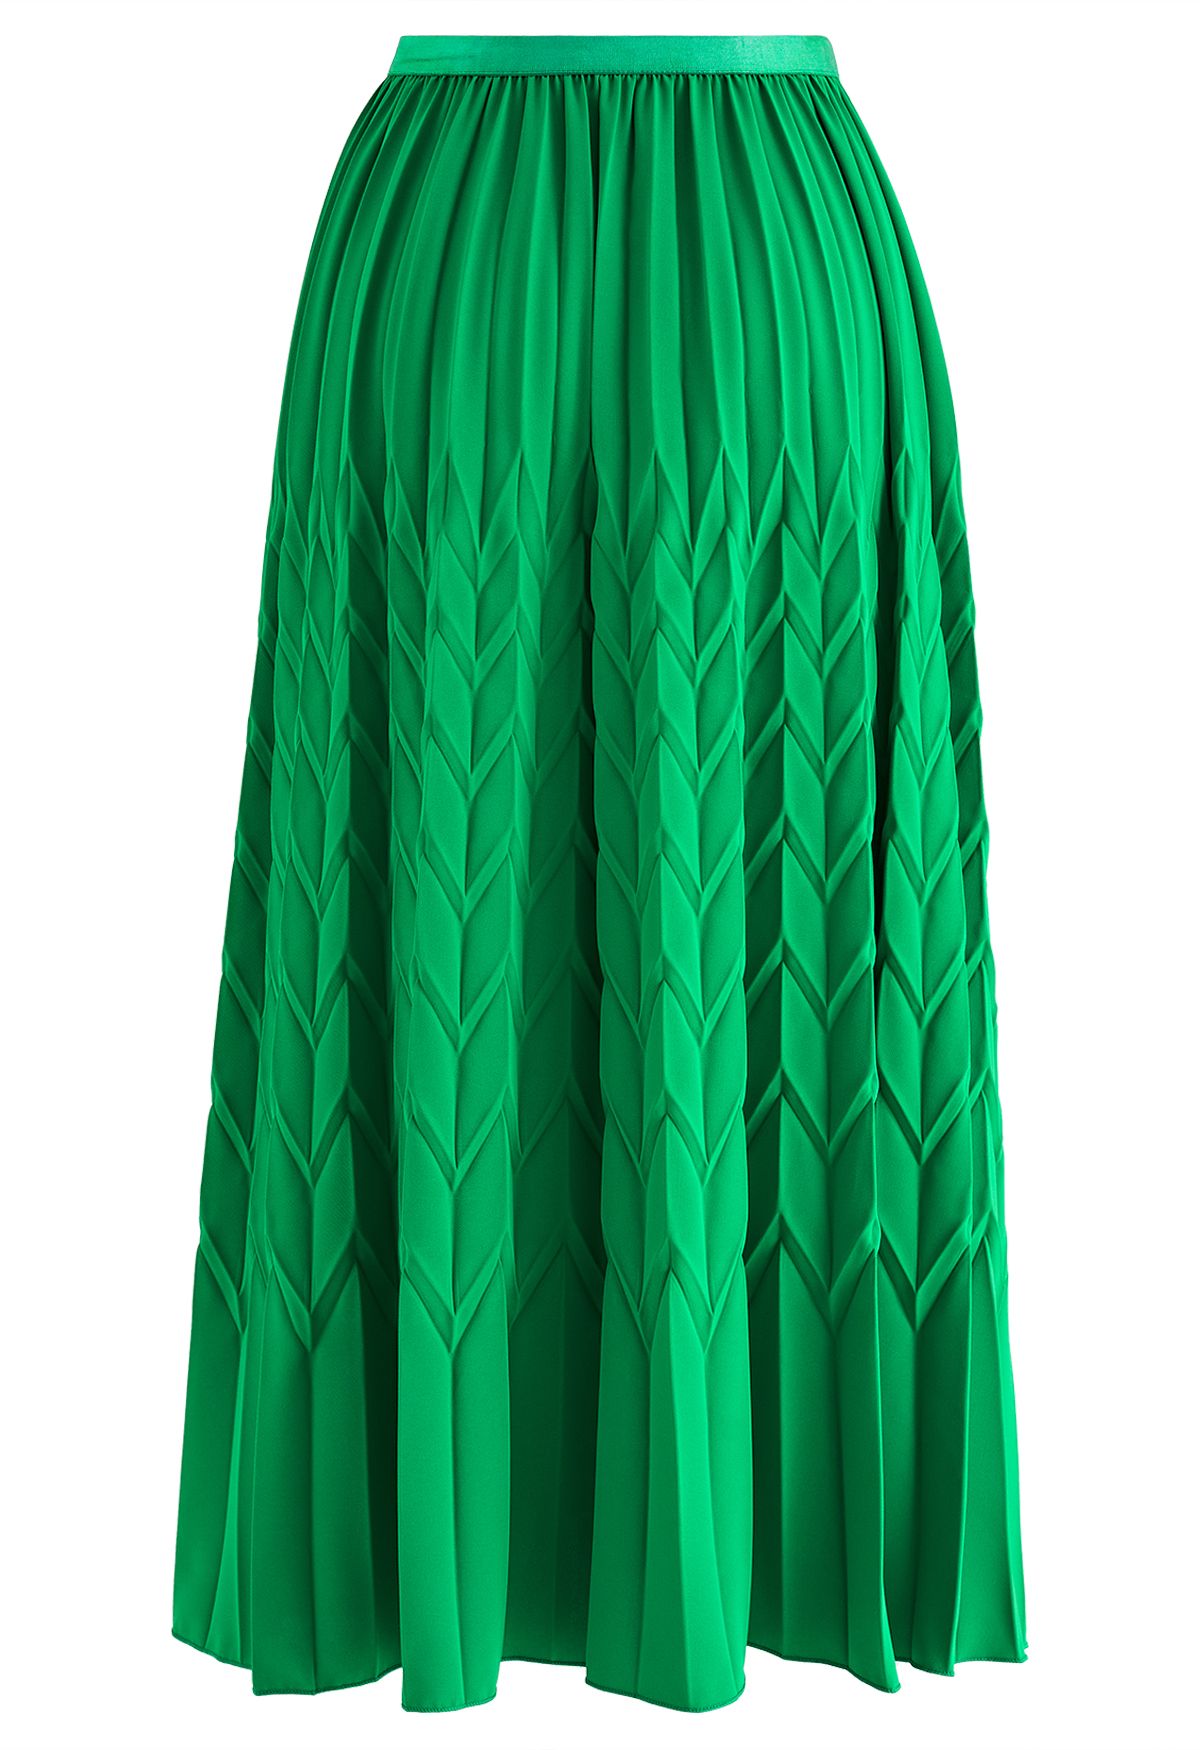 Zigzag Embossed Pleated Midi Skirt in Green - Retro, Indie and Unique ...